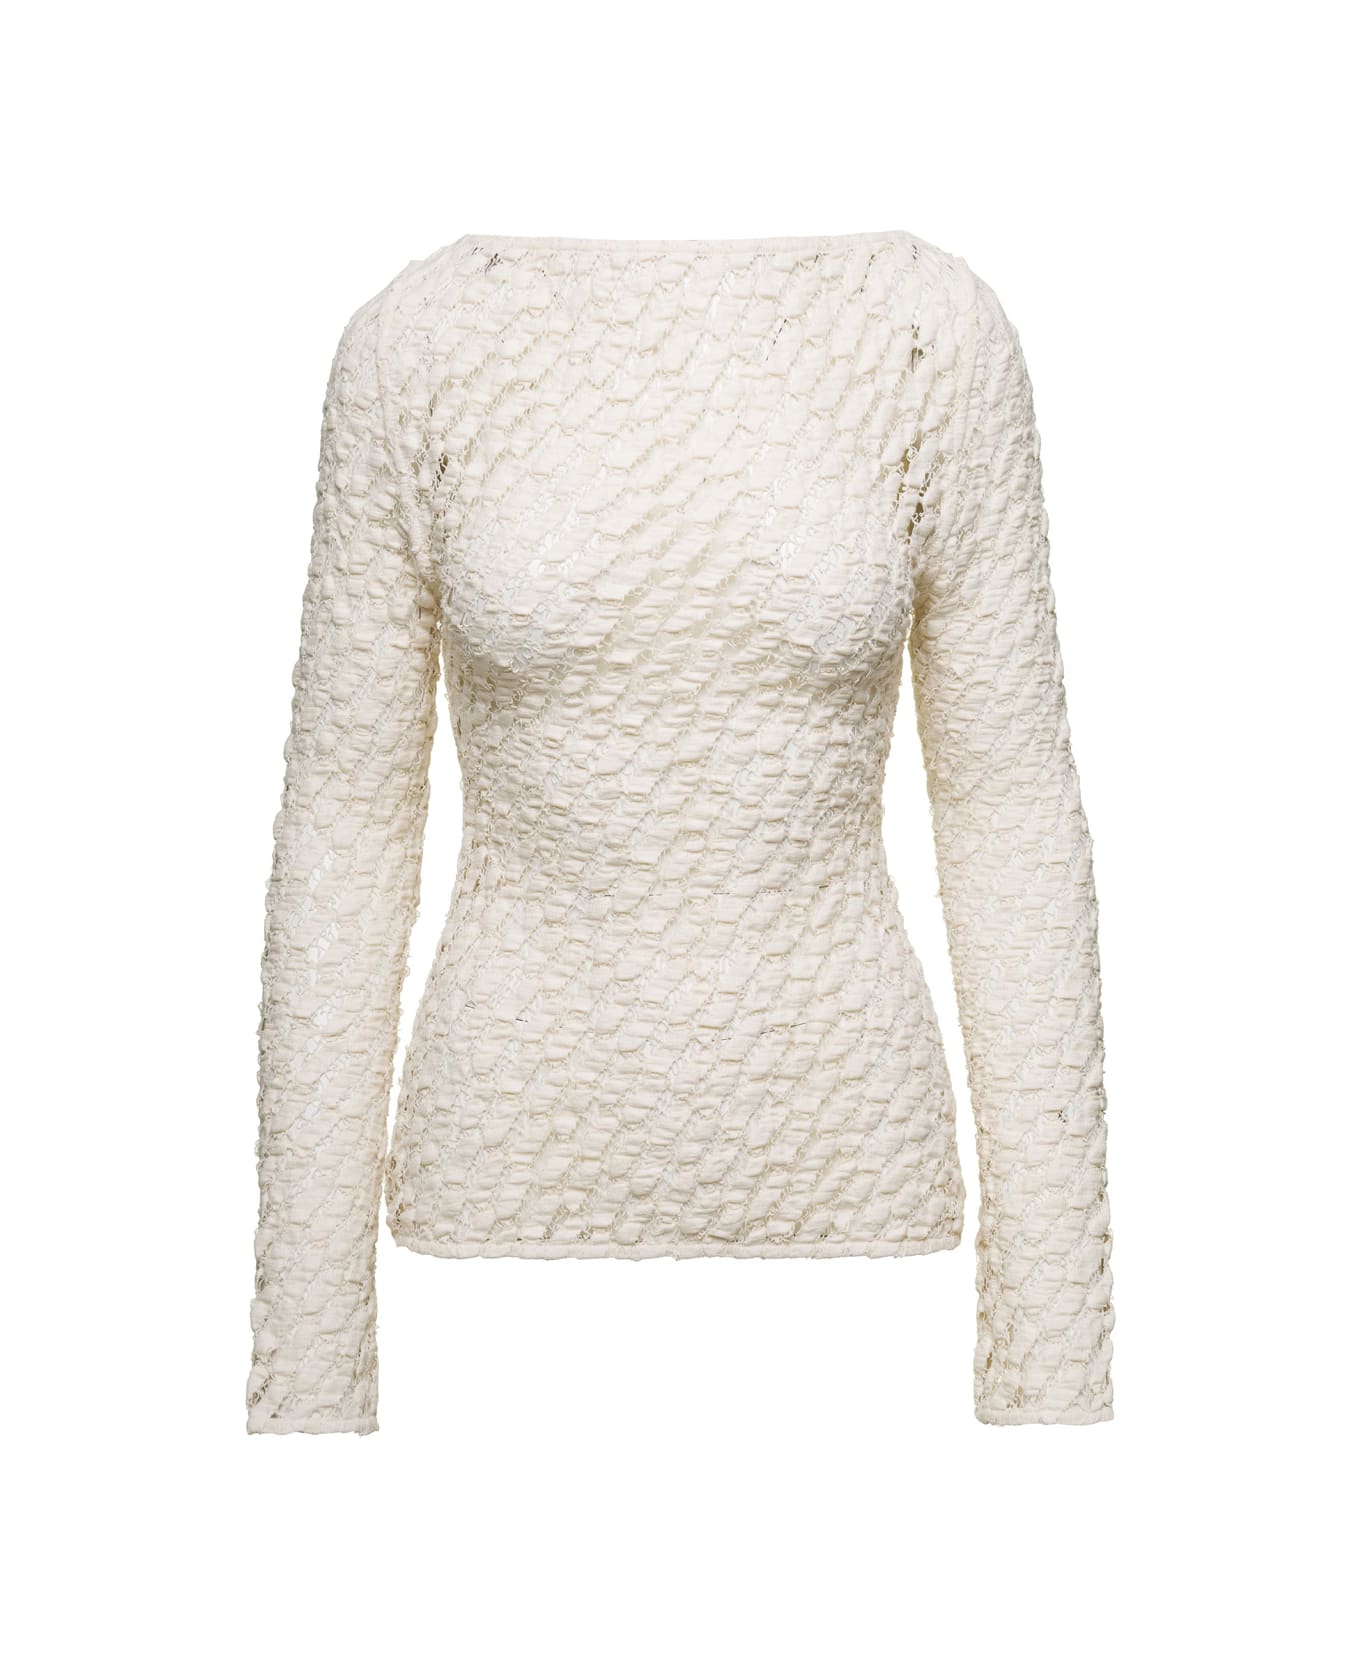 Róhe Beige Sweater With Boat Neckline In Cotton Blend Woman - White